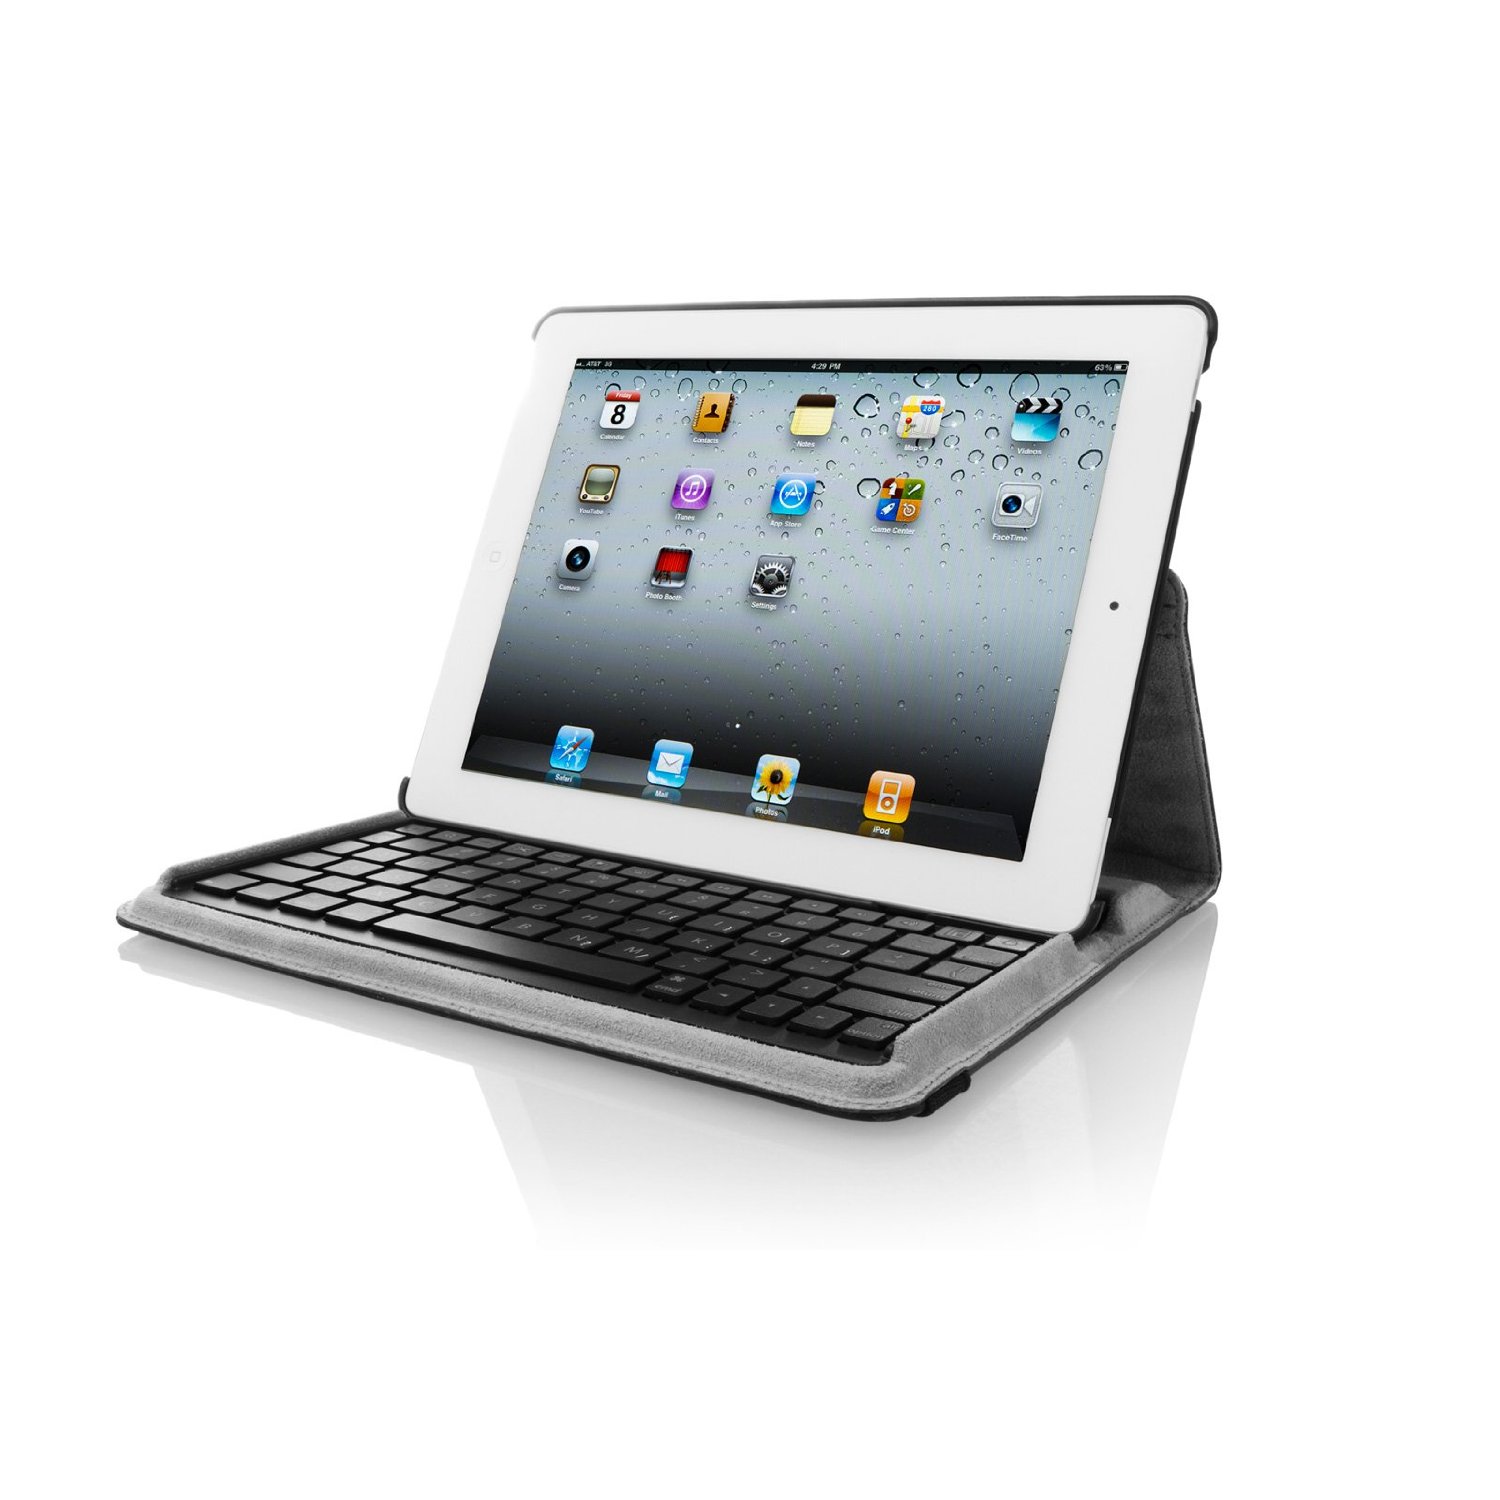 http://thetechjournal.com/wp-content/uploads/images/1108/1312709193-targus-versavu-case-and-keyboard-for-ipad-2-3.jpg